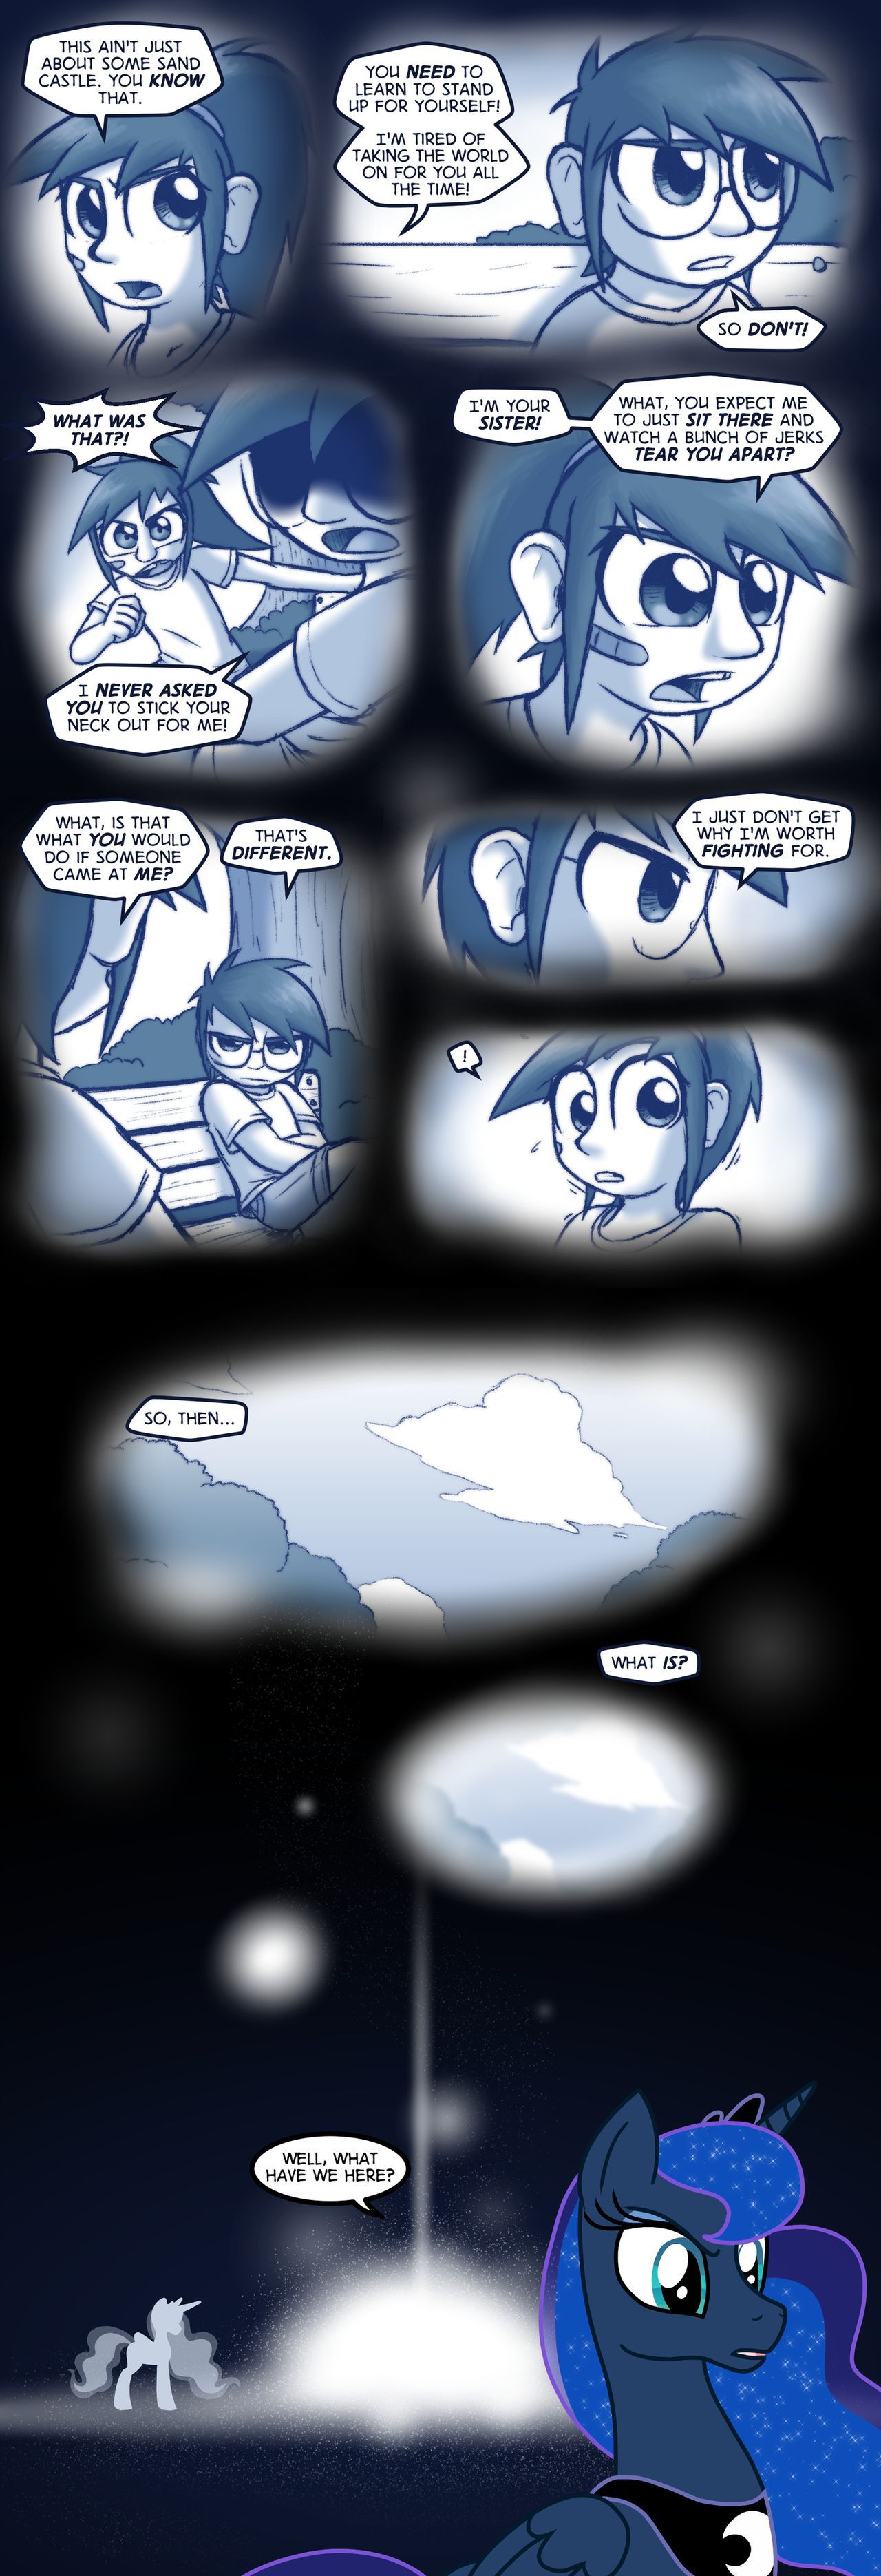 [Zaron] Lonely Hooves (My Little Pony Friendship Is Magic) [Ongoing] 75